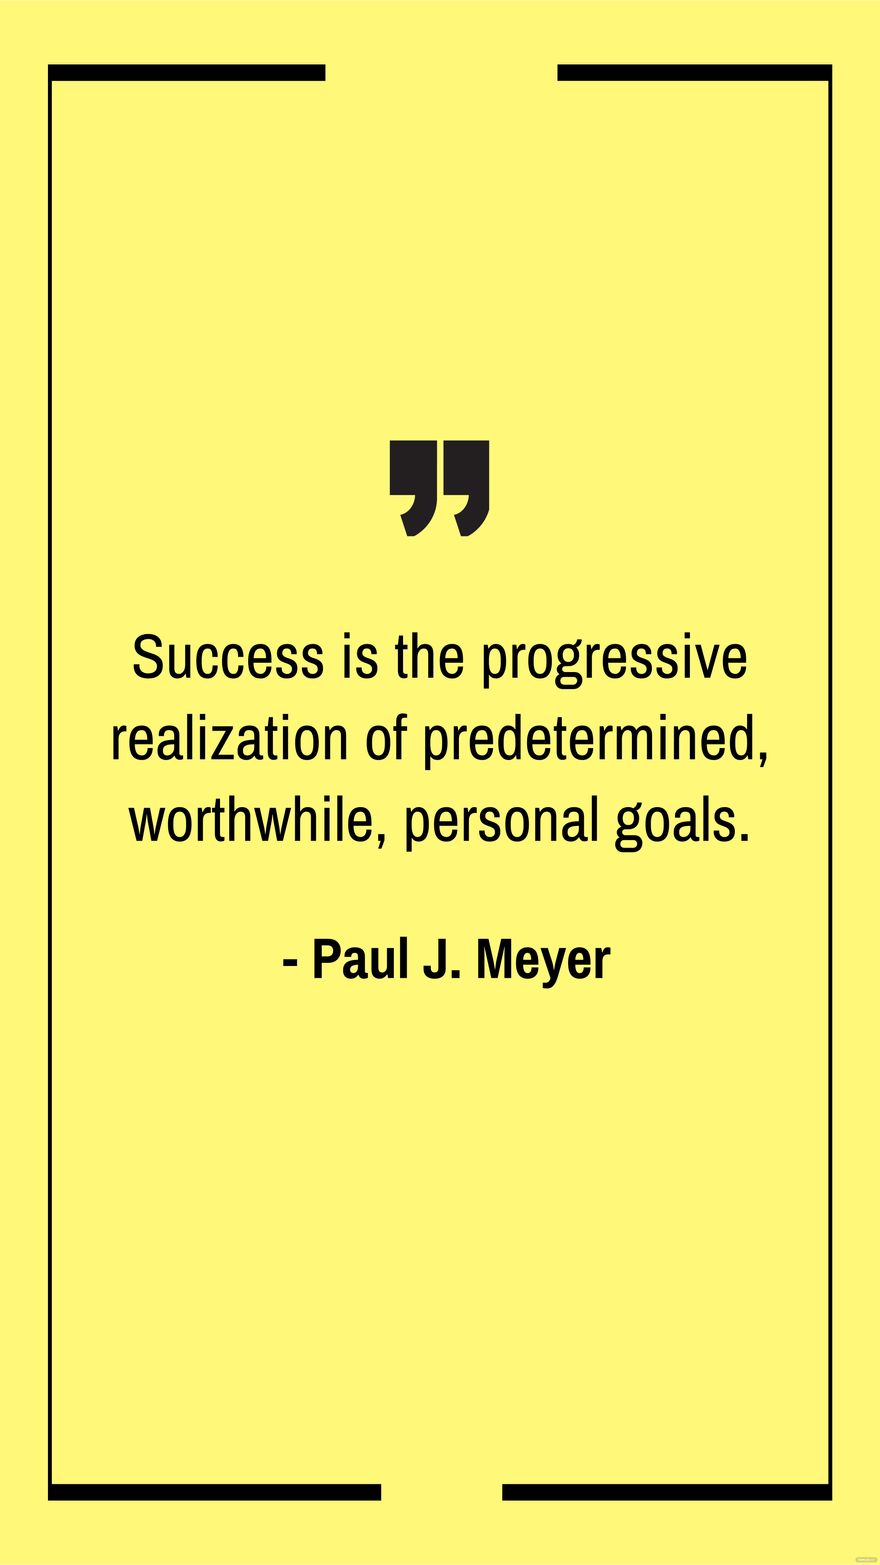 Paul J. Meyer - Success is the progressive realization of predetermined, worthwhile, personal goals.